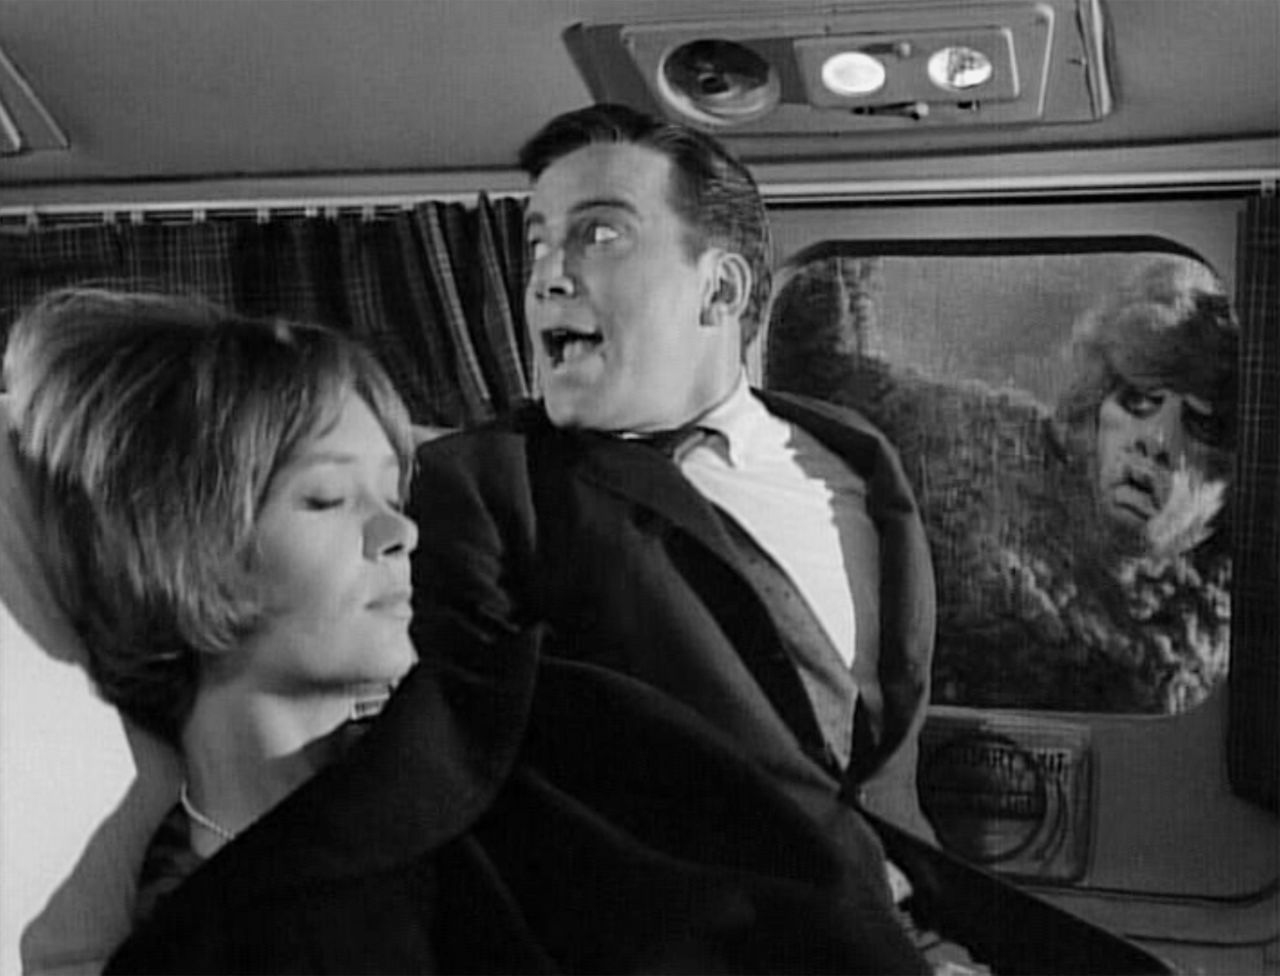 One of the most memorable episodes of "The Twilight Show" starred Shatner as an airline passenger who sees a gremlin on the wing of the plane. The episode, "Nightmare at 20,000 Feet," first aired in 1963.